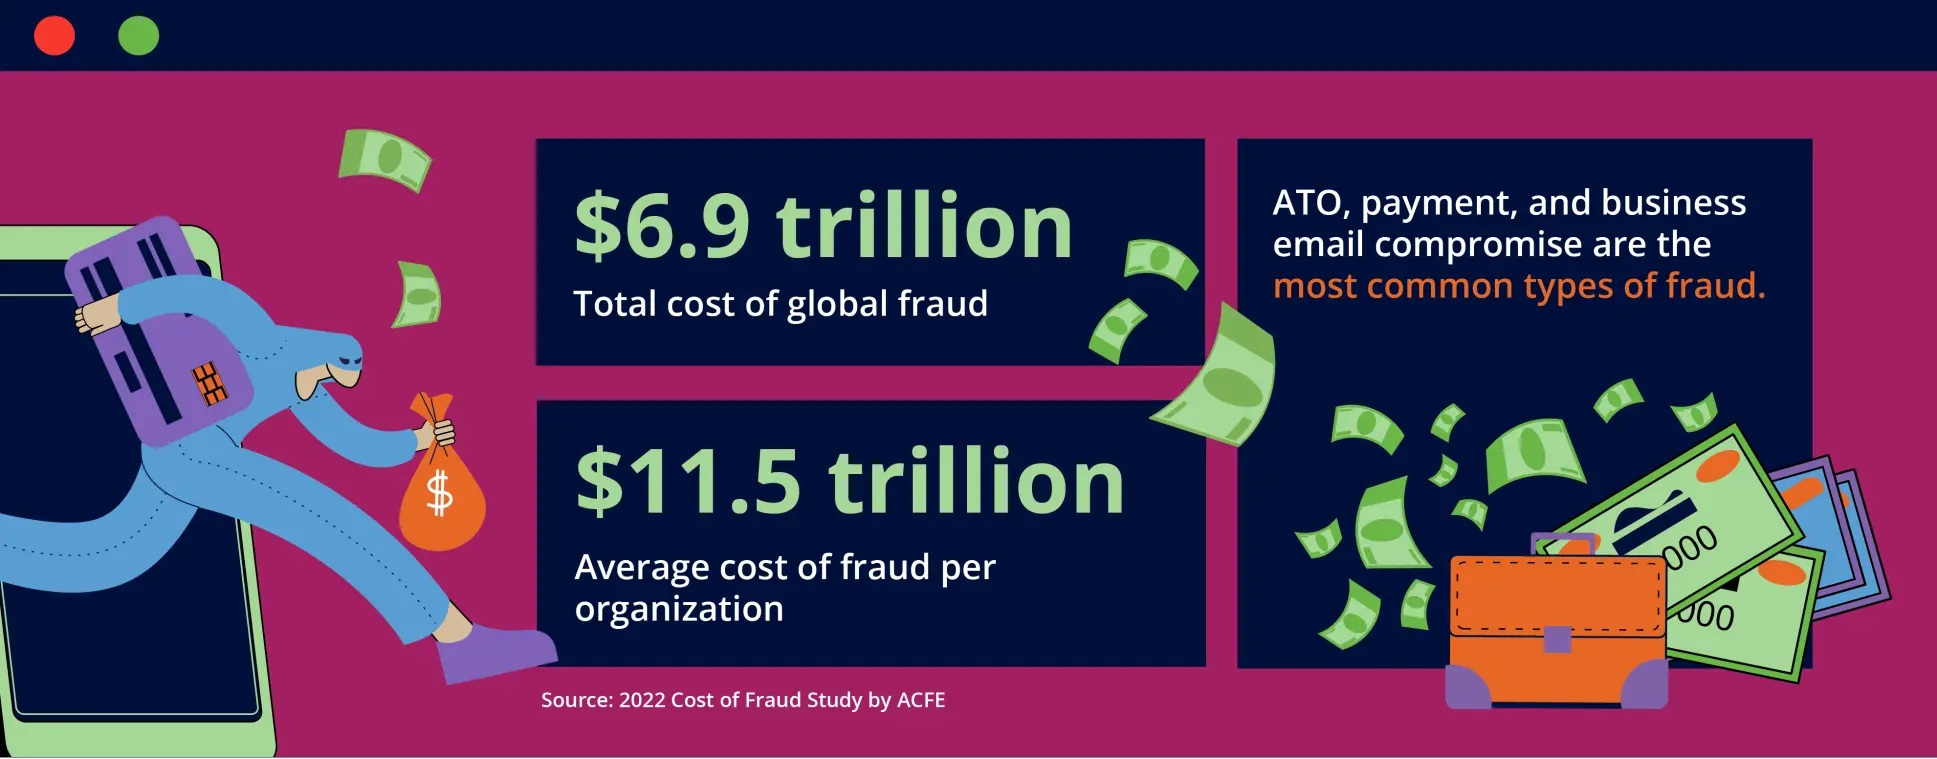 Illustration outlining value of account takeover fraud - key to understanding account takeover fraud prevention